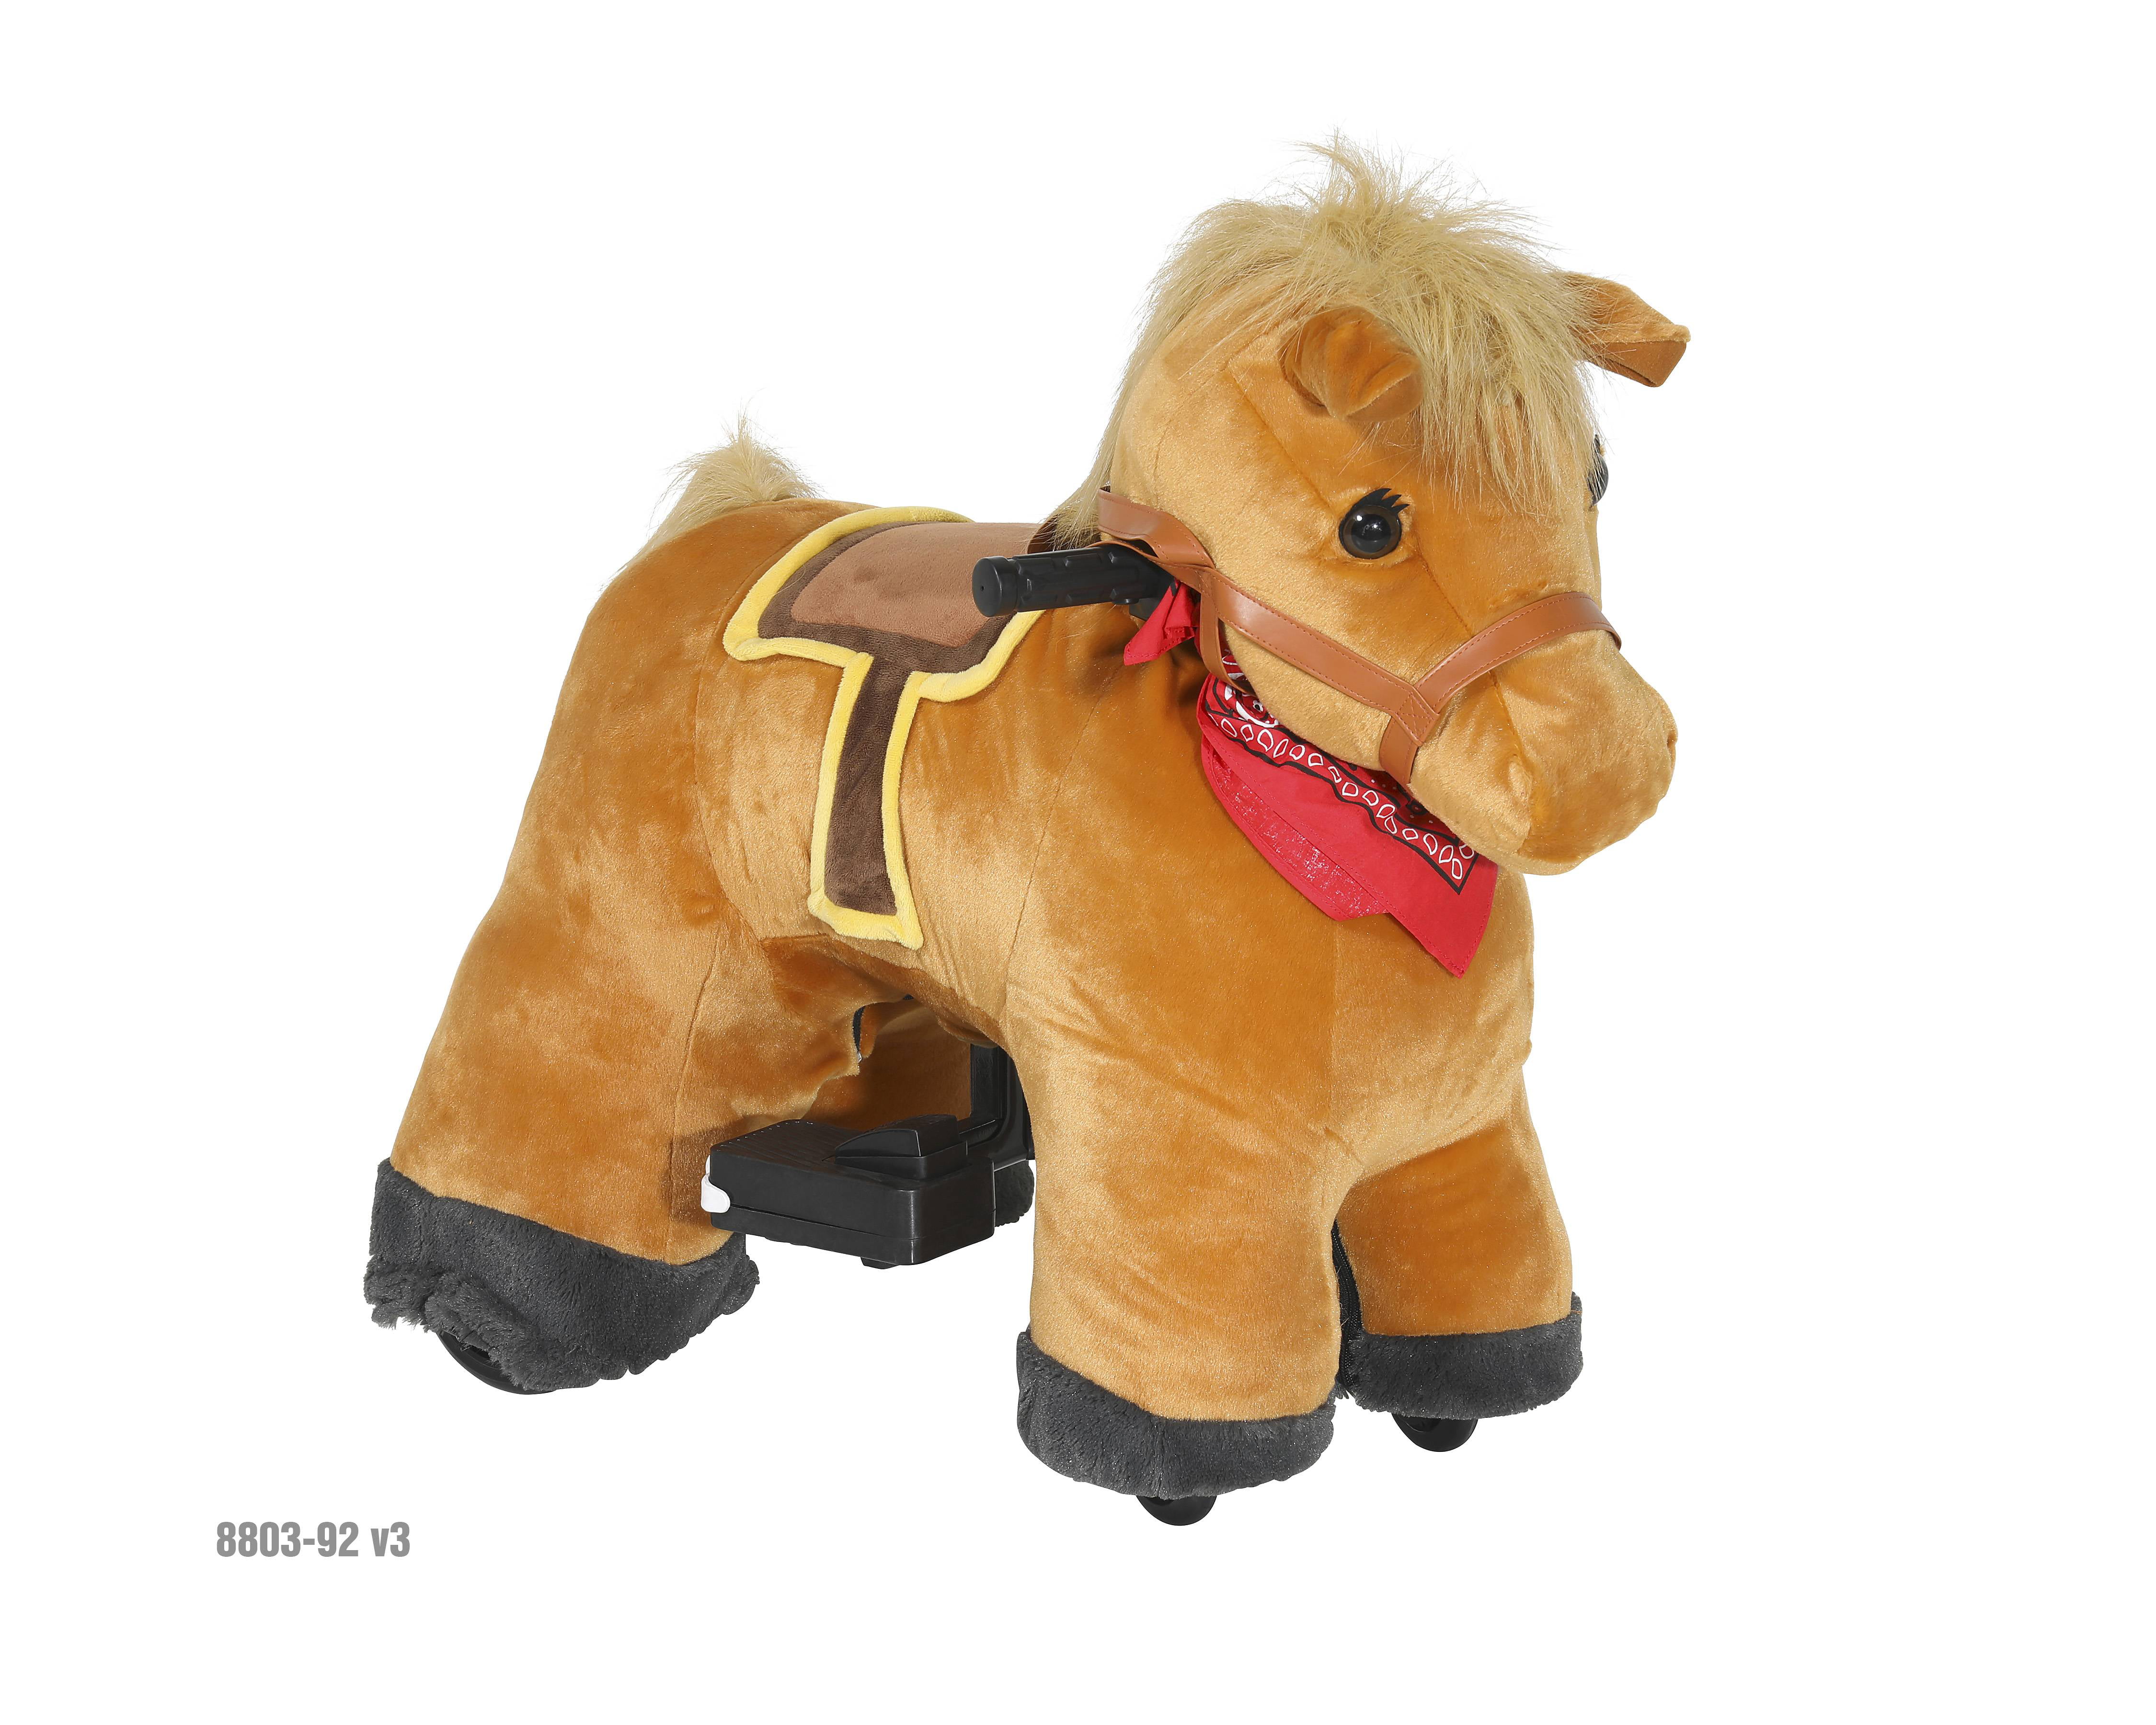 electric ride on horse toy